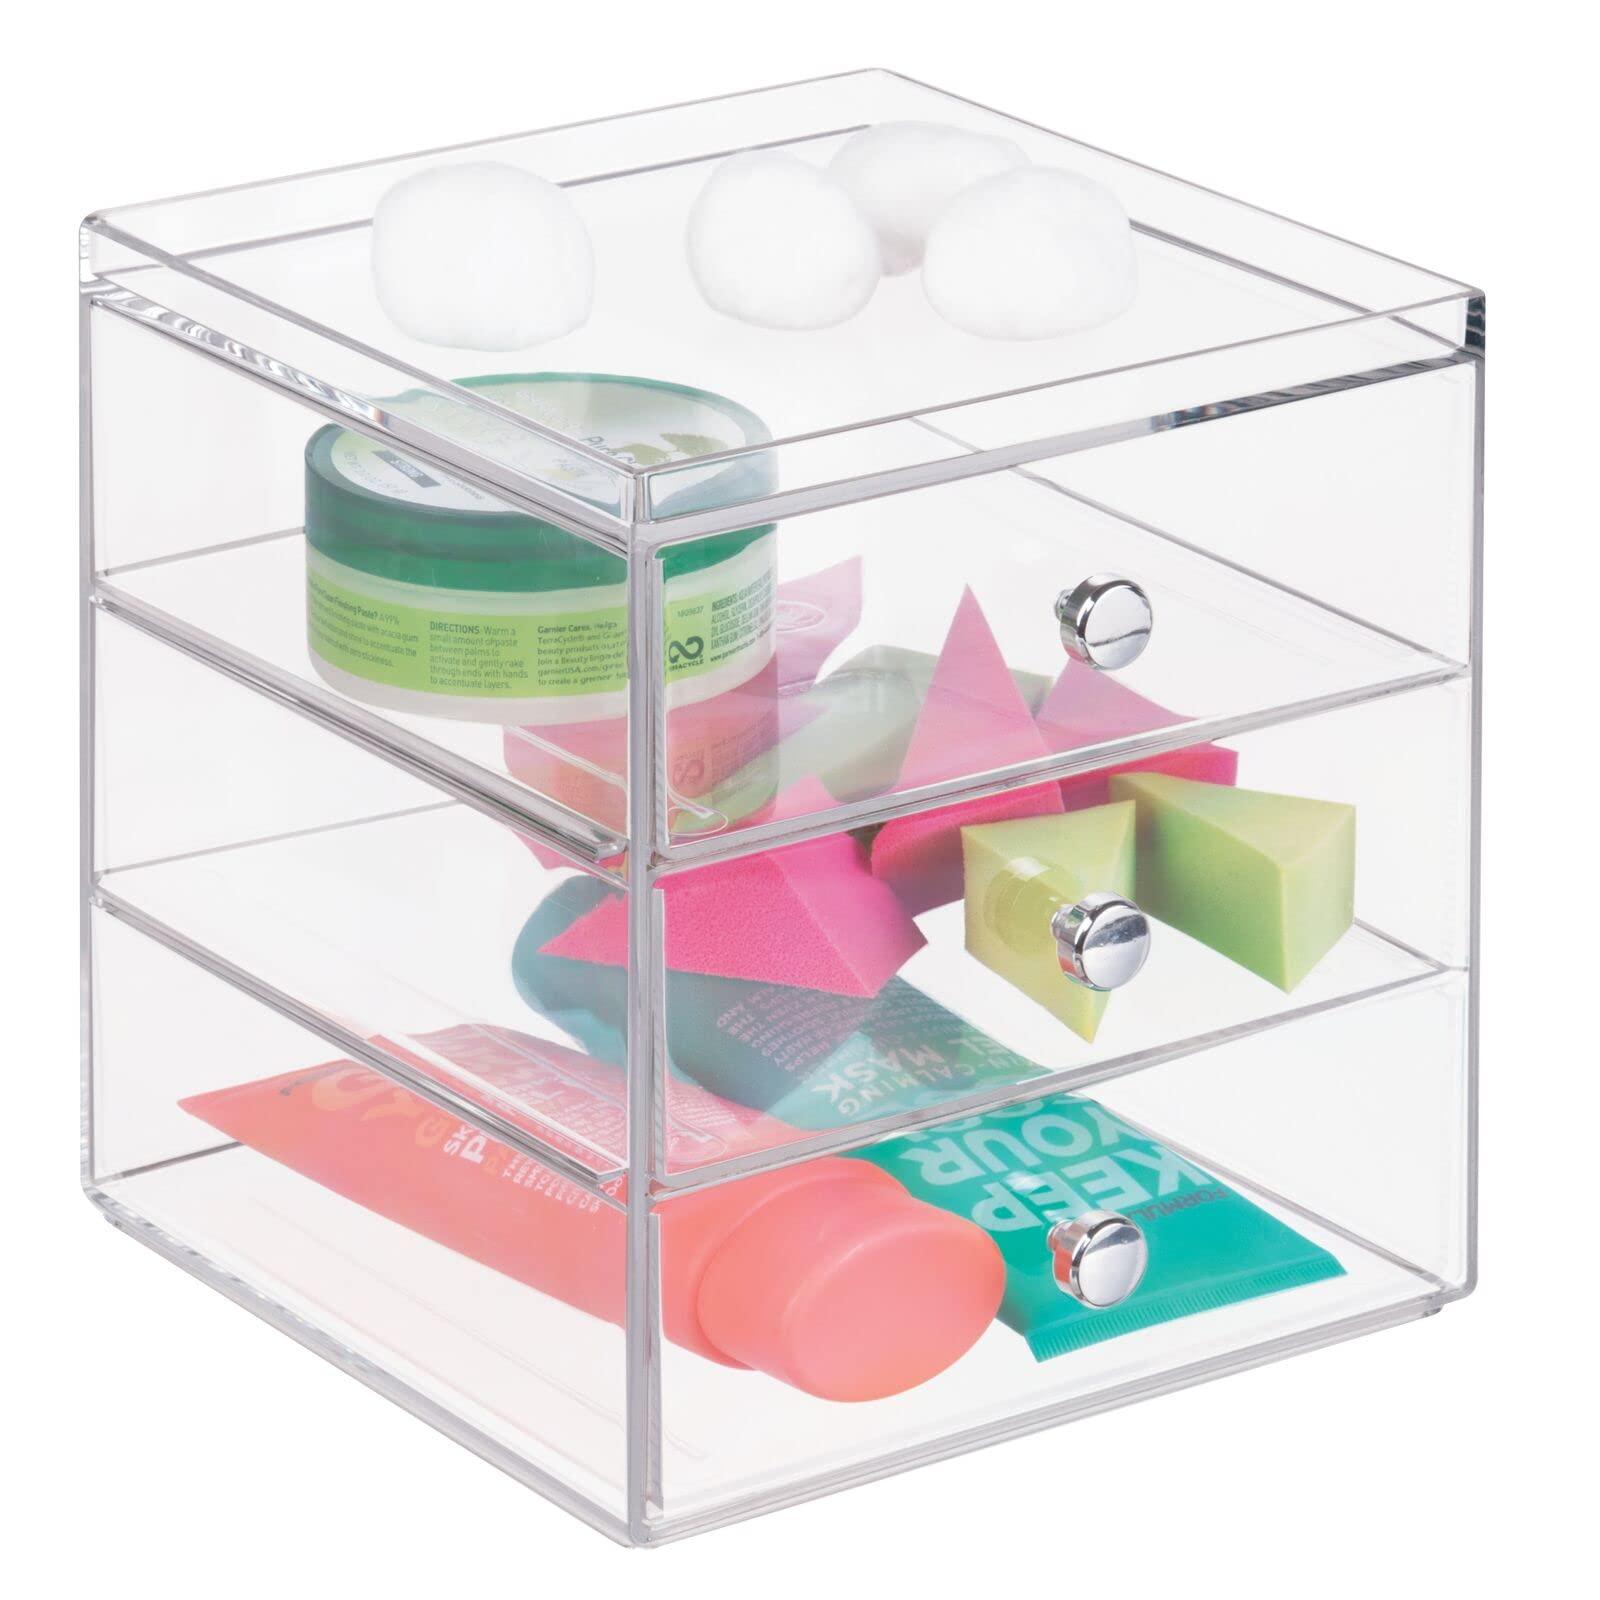 mDesign Makeup Organiser - Makeup Storage Unit with 3 Drawers - Accessory and Cosmetic Storage Box - Clear 0